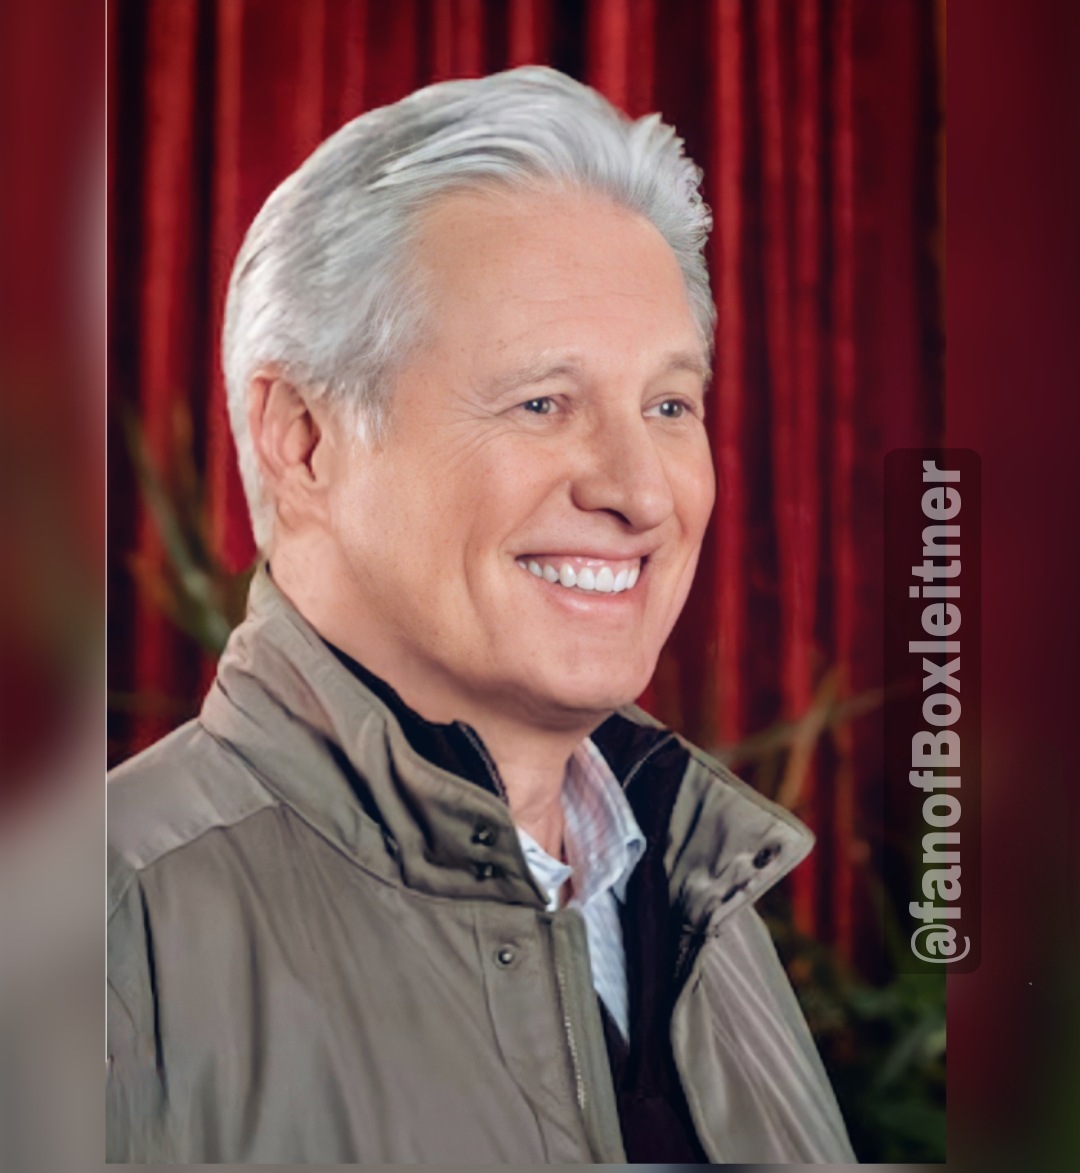 Double feature 
#MatchMakerMysteries A Fatal Romance and The Art of the Kill
tonight  Thursday May 25 starting at 7pm ET
on @hallmarkmovie 
#bruceboxleitner